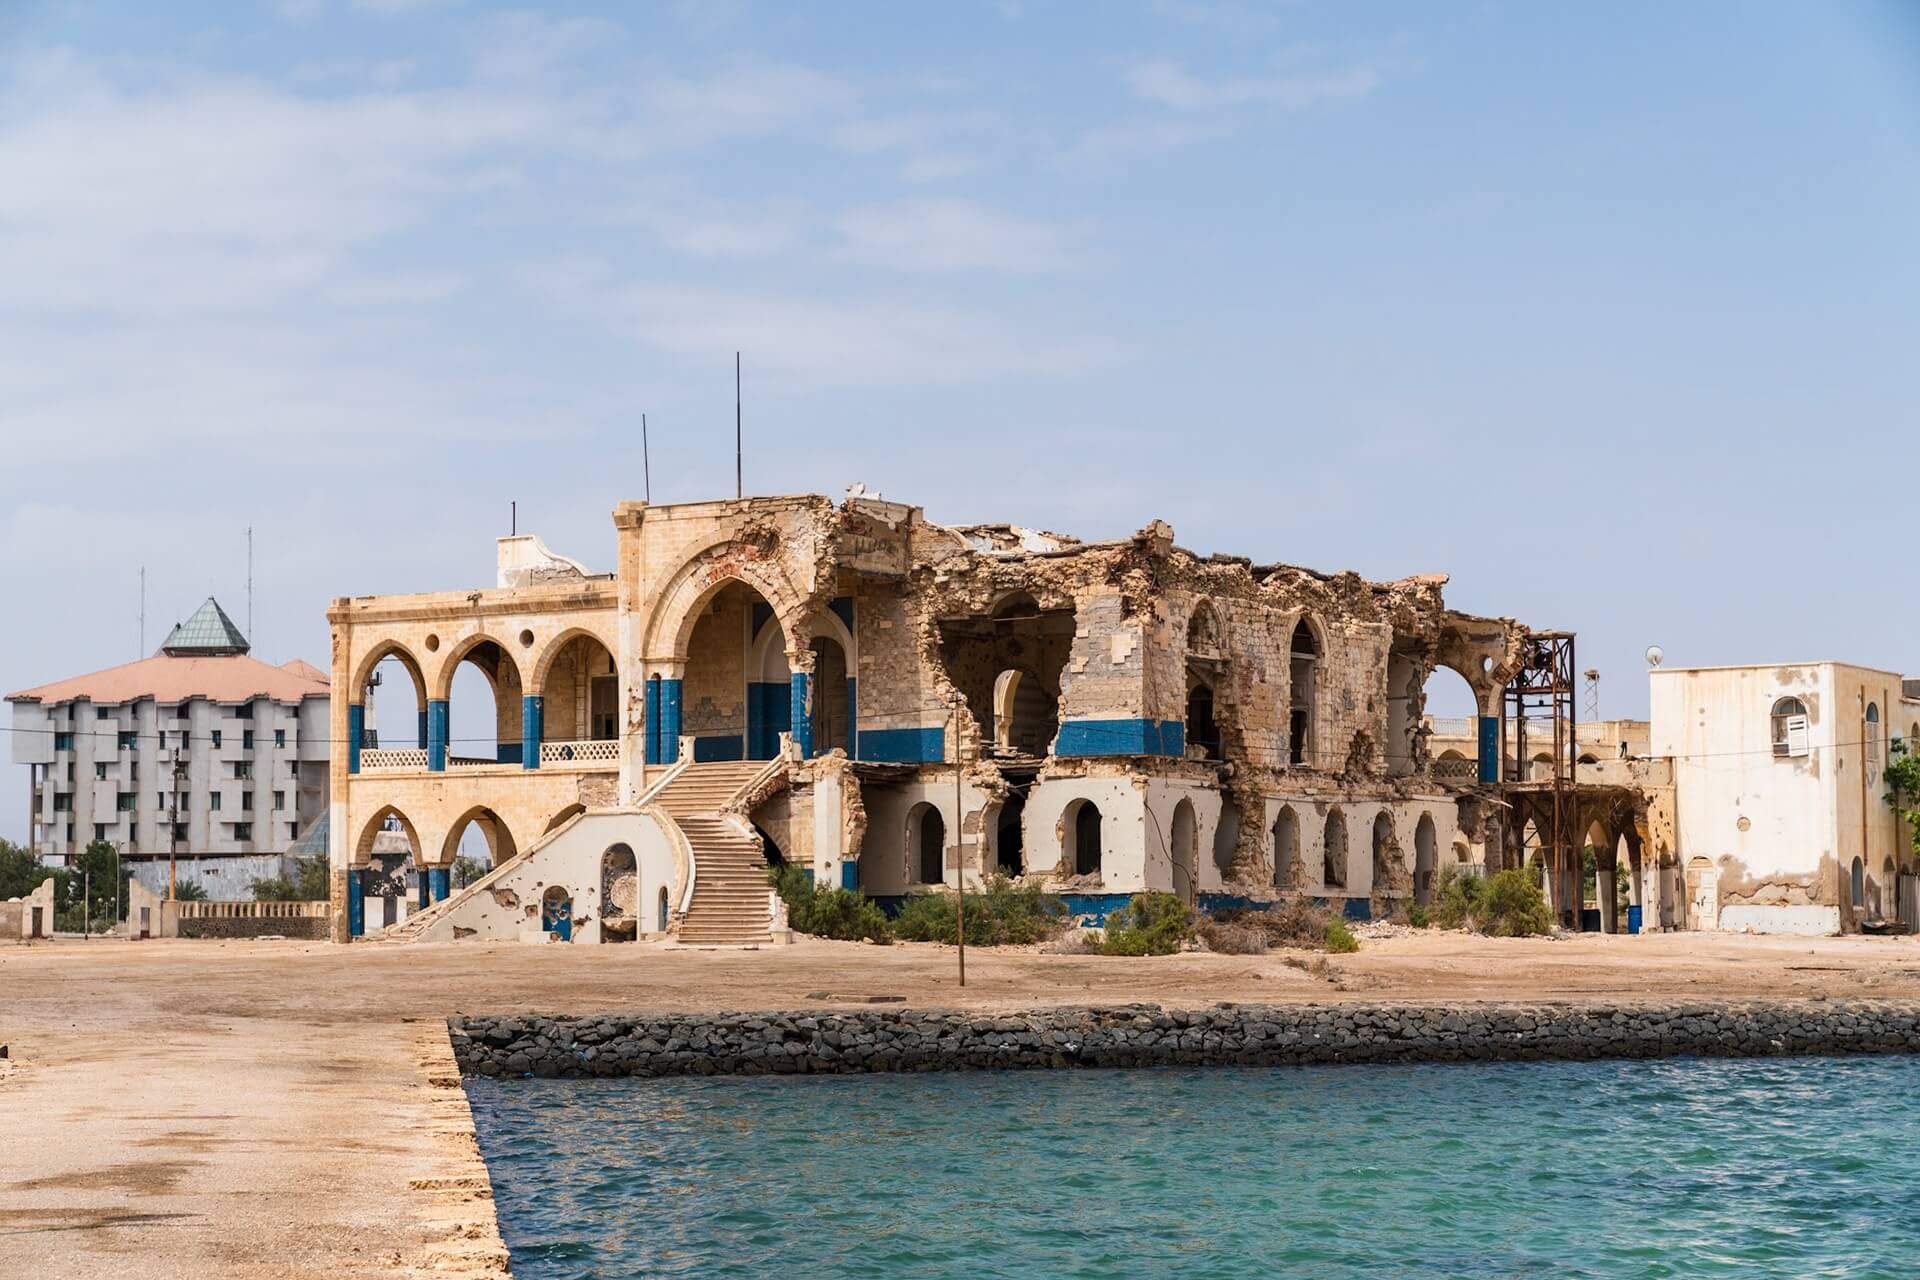 Massawa Haile Selassie old palace -3 Days Tour Asmara - things to see and do in Eritrea